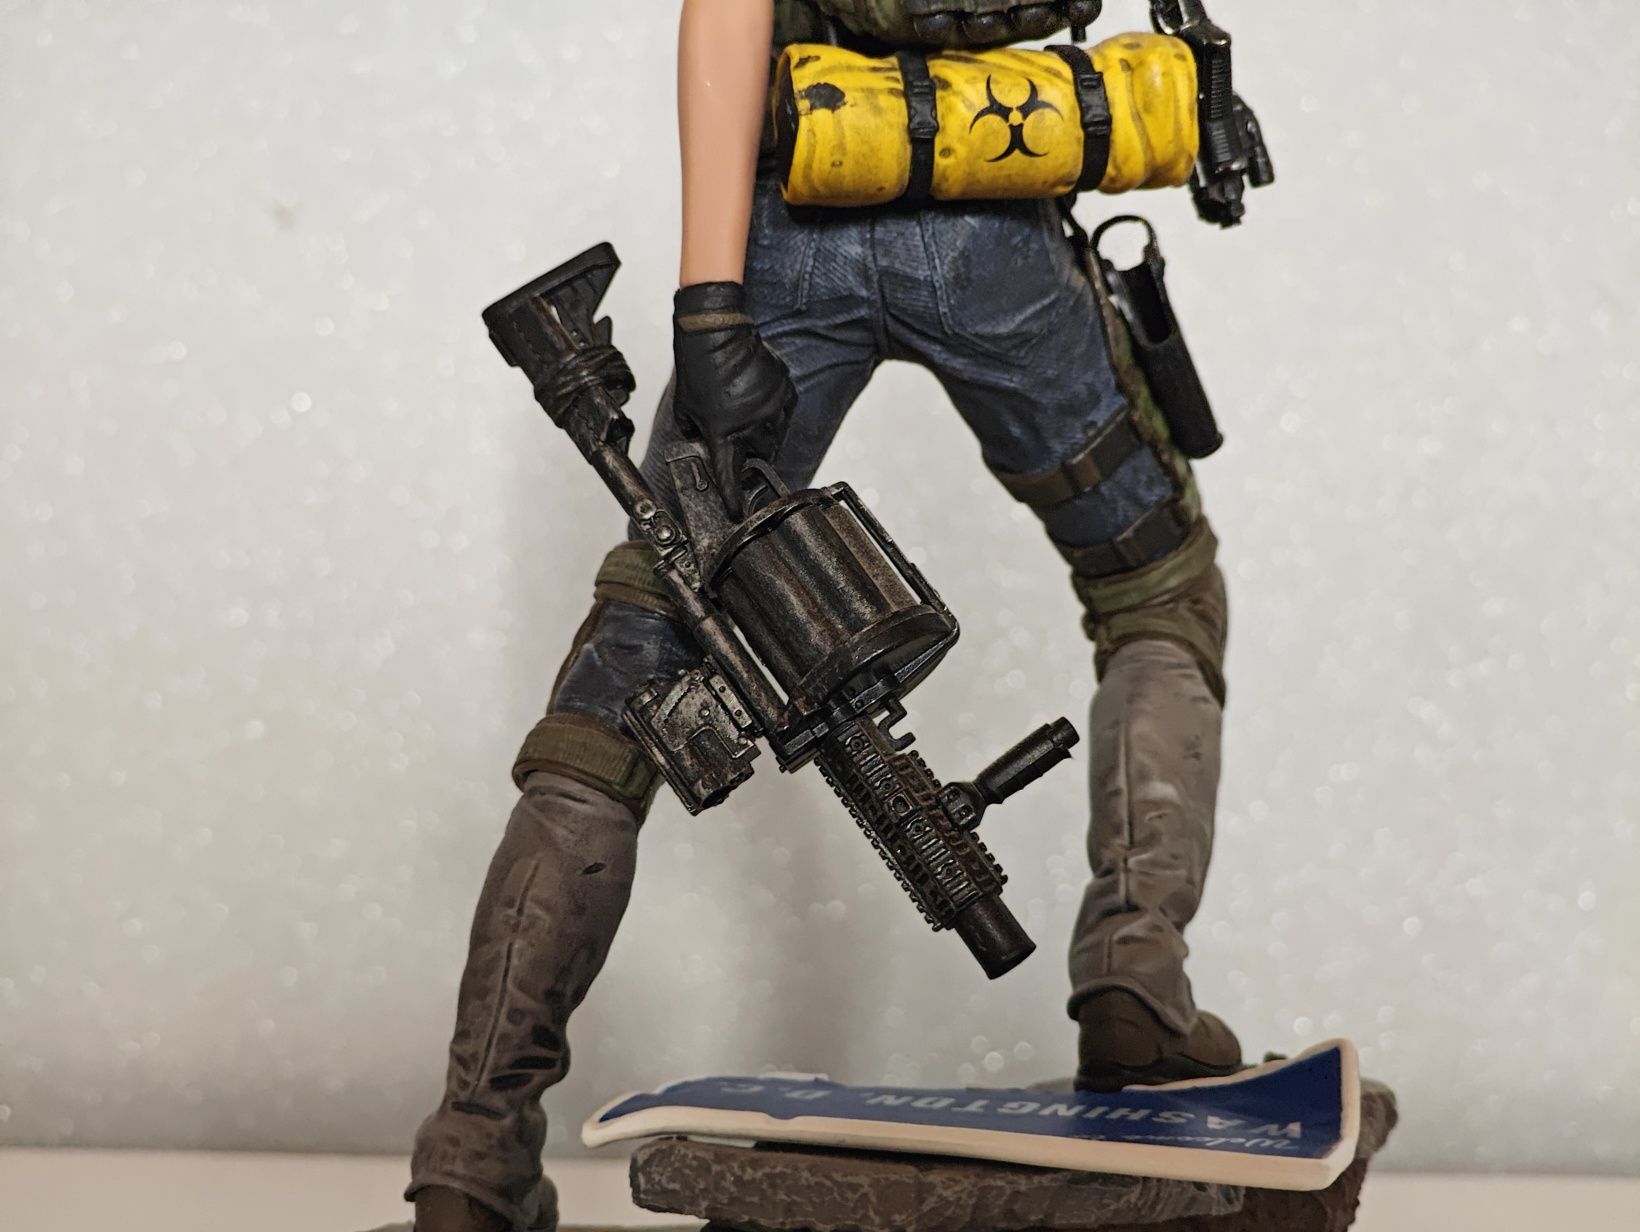 Figurka Heather Ward z gry Tom Clancy's The Division2.